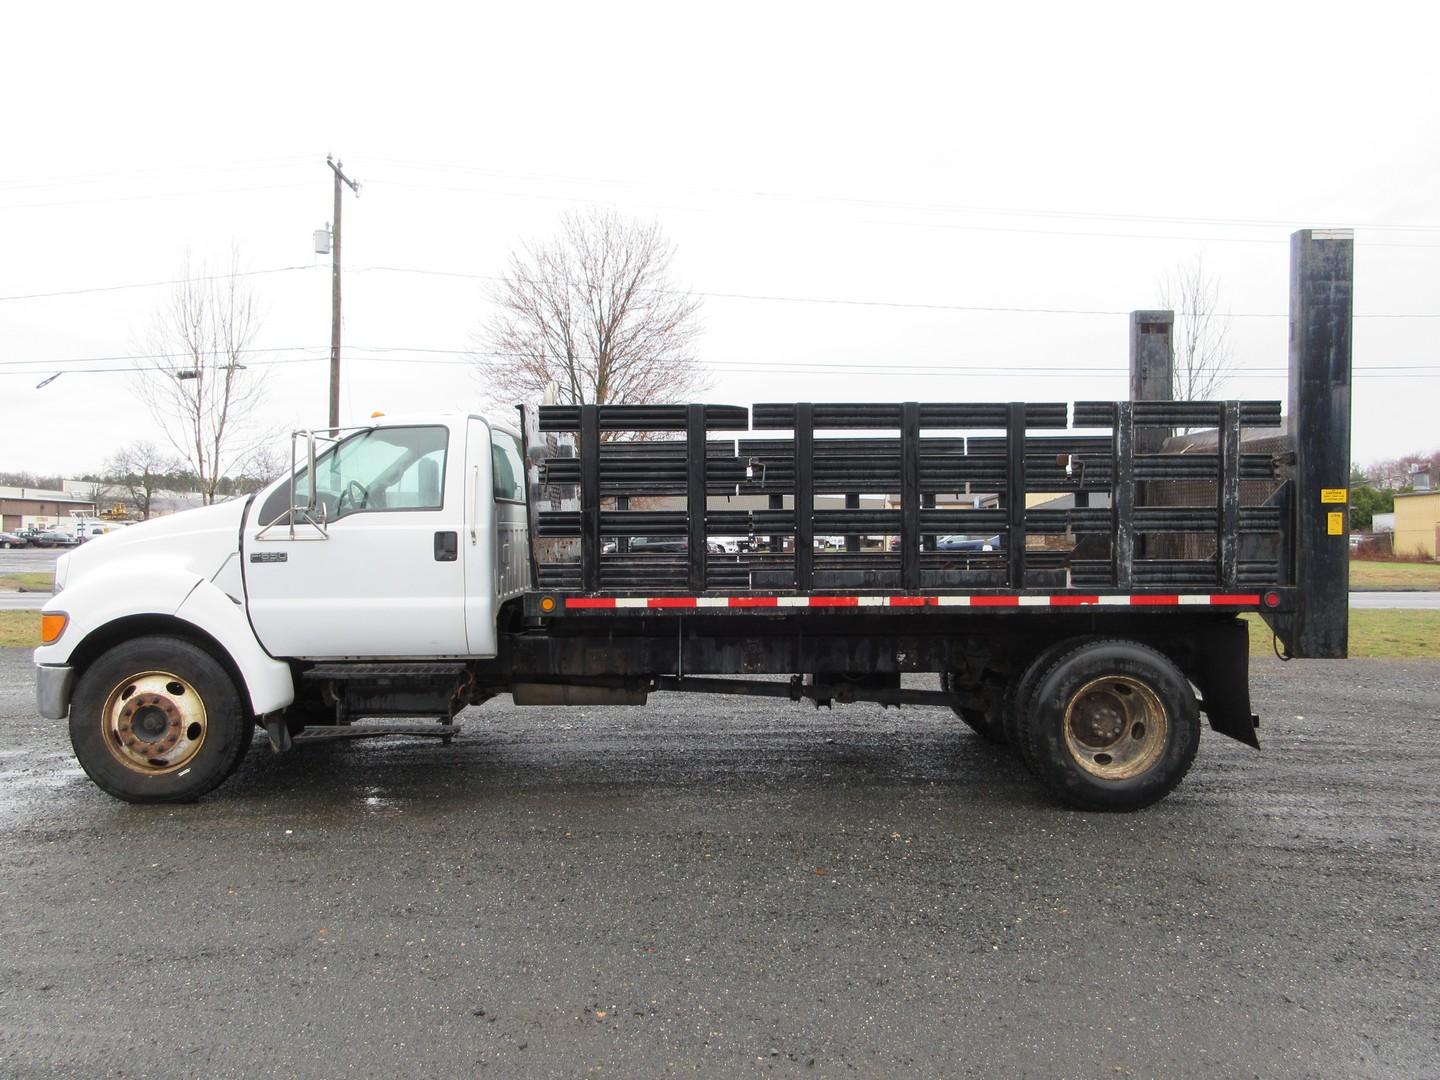 2005 Ford F-650 XL S/A Flatbed Truck